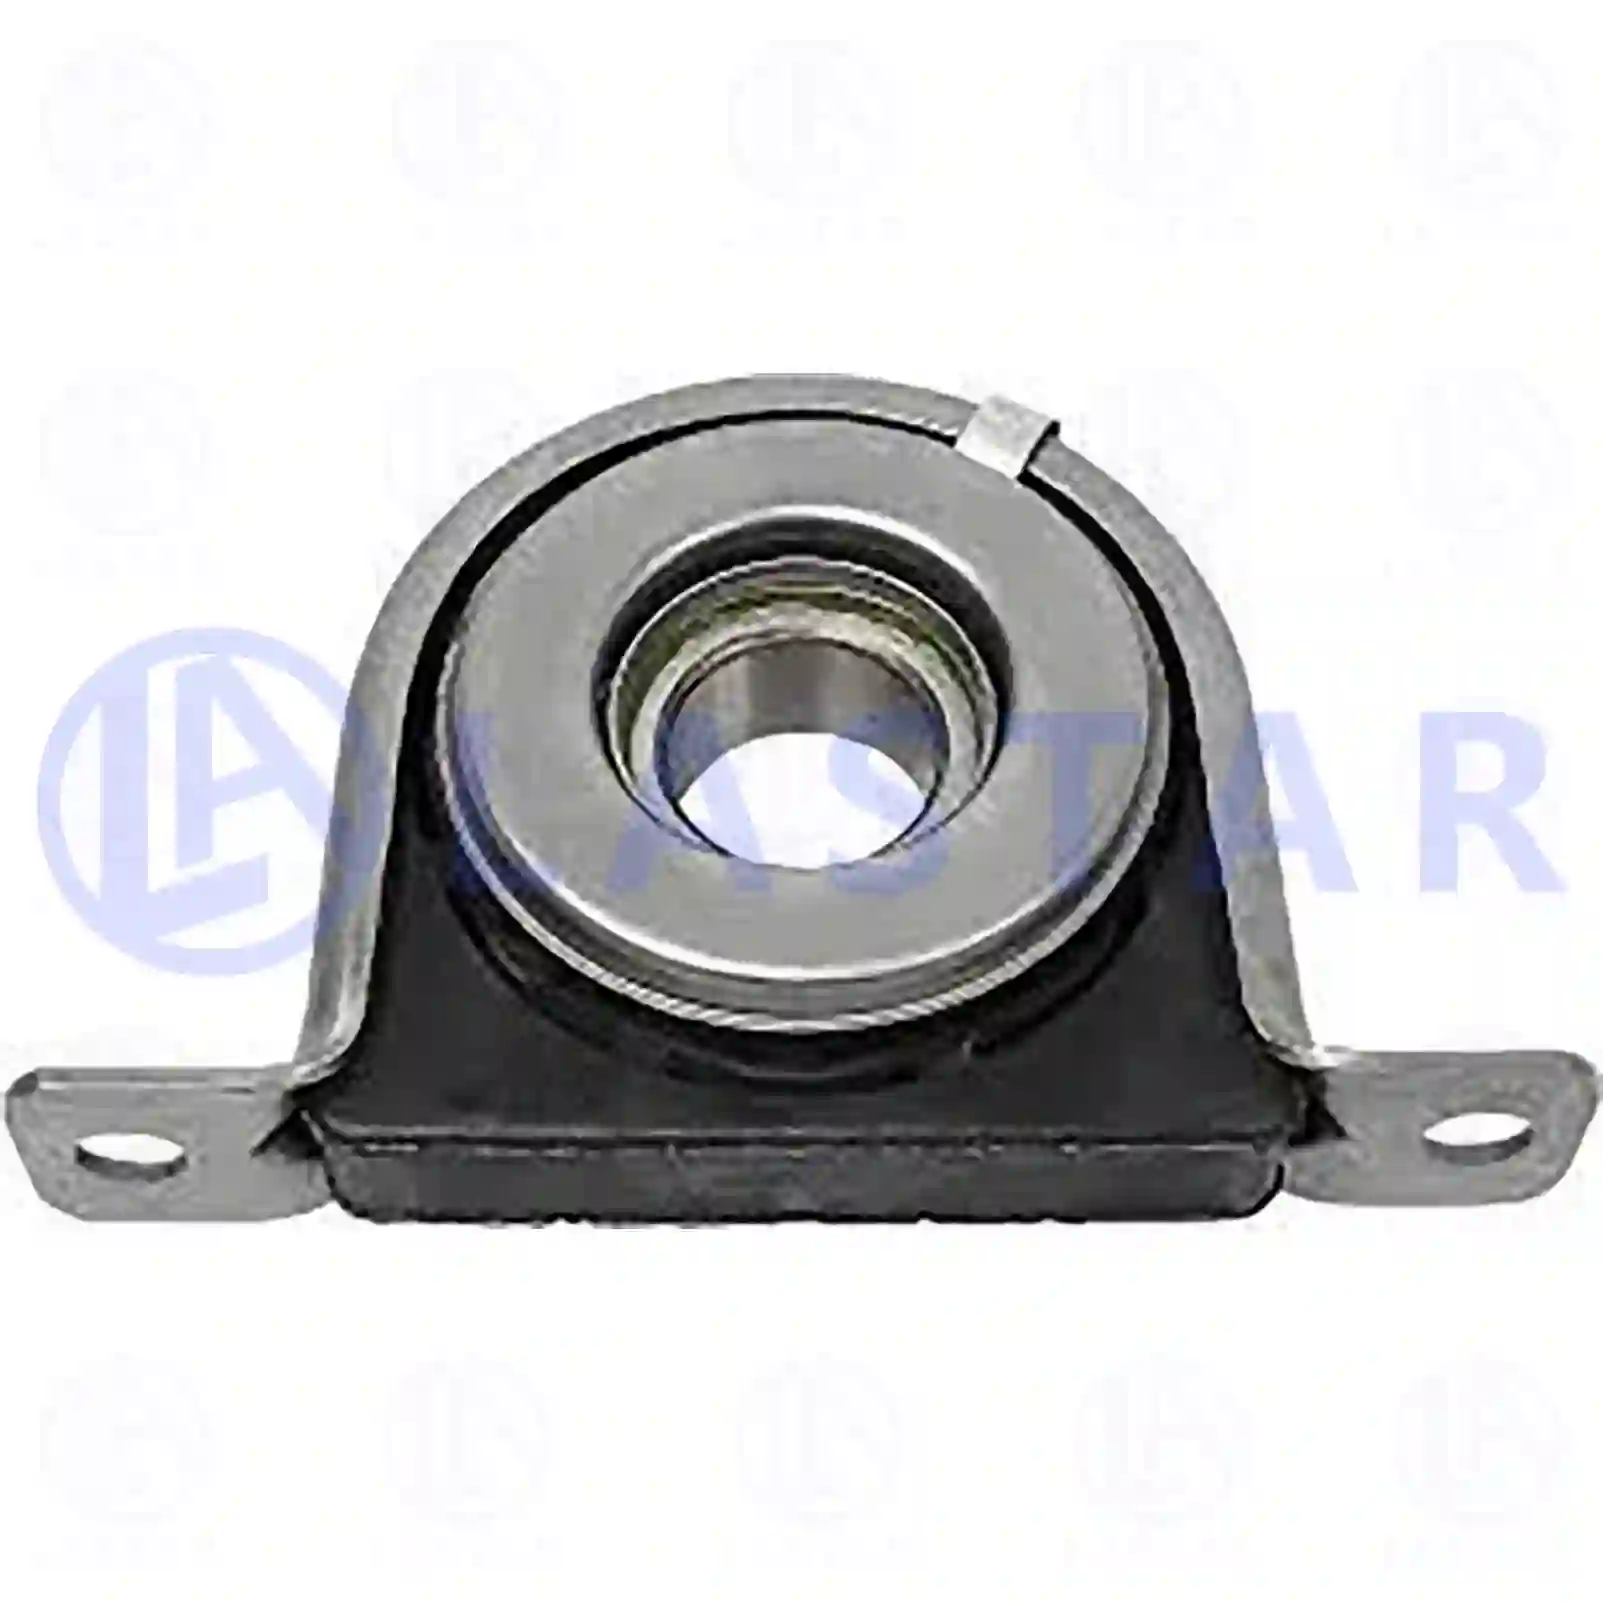 Center bearing, 77734359, 93163376 ||  77734359 Lastar Spare Part | Truck Spare Parts, Auotomotive Spare Parts Center bearing, 77734359, 93163376 ||  77734359 Lastar Spare Part | Truck Spare Parts, Auotomotive Spare Parts